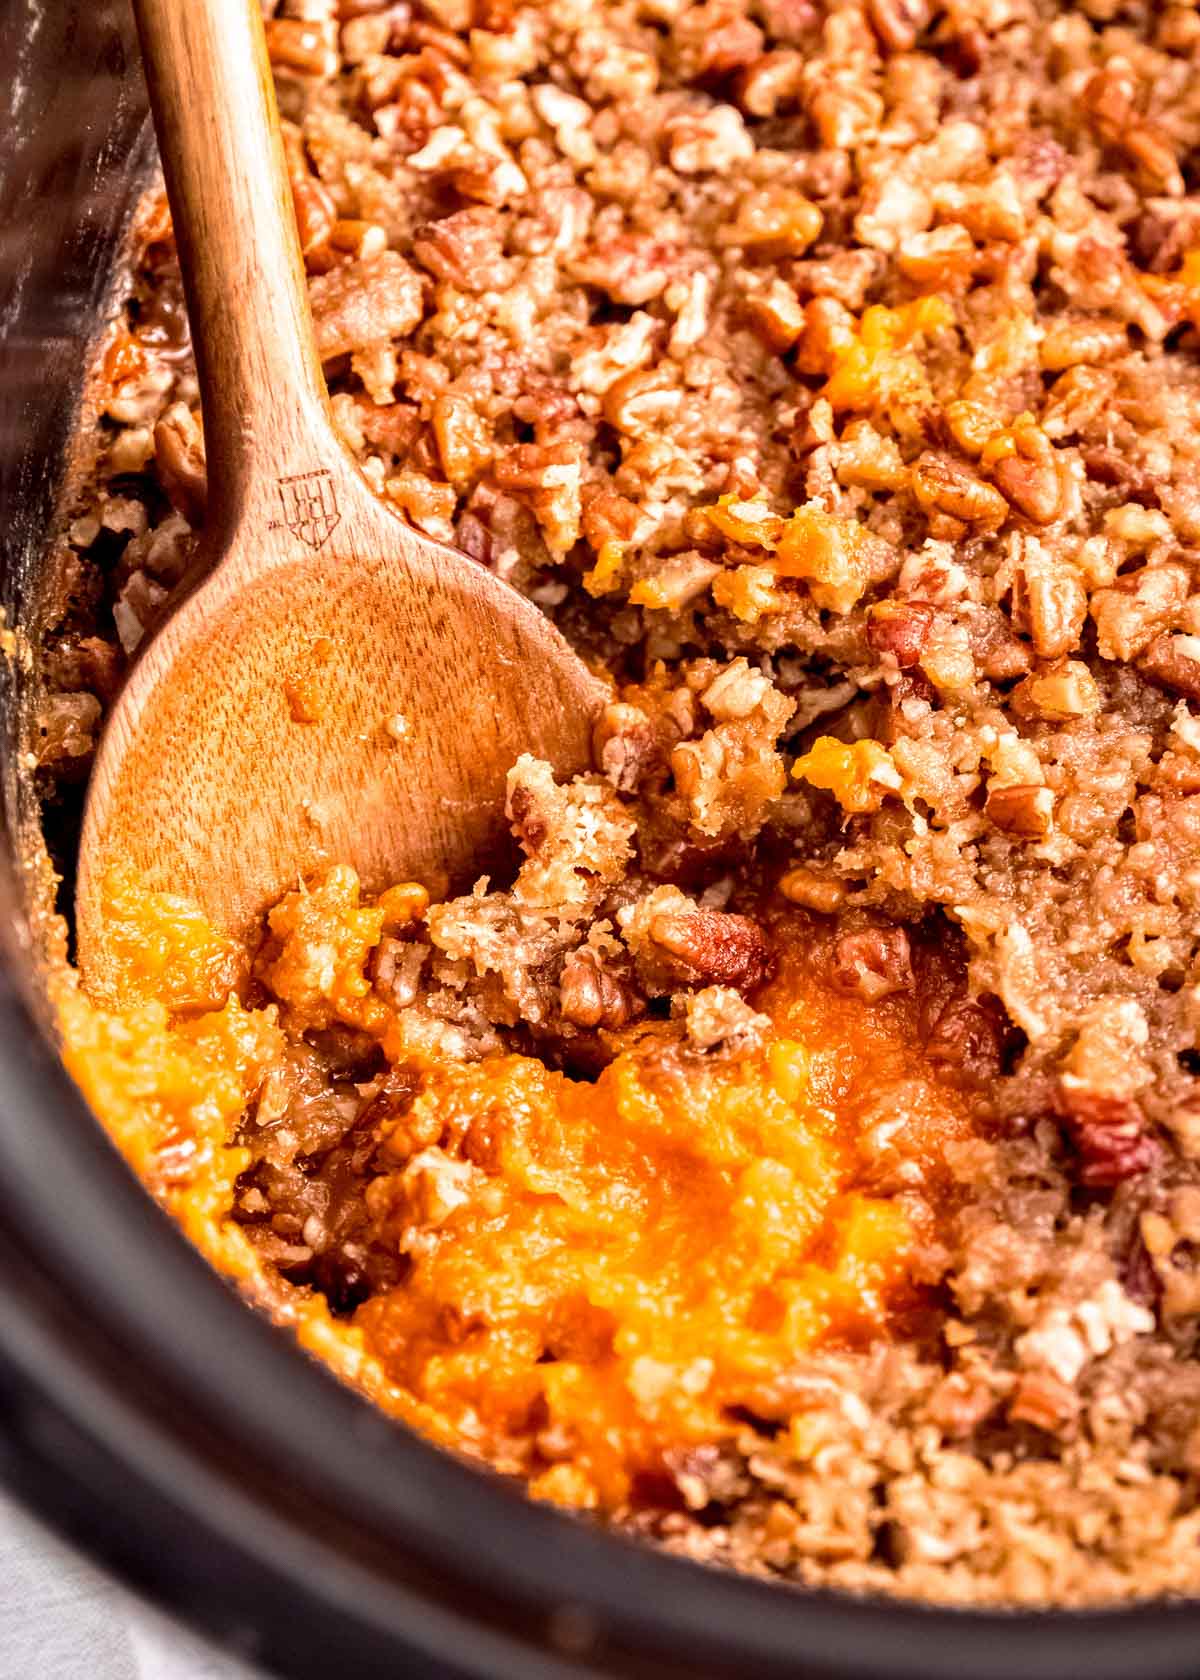 a slow cooker with sweet potato casserole with a brown sugar pecan topping